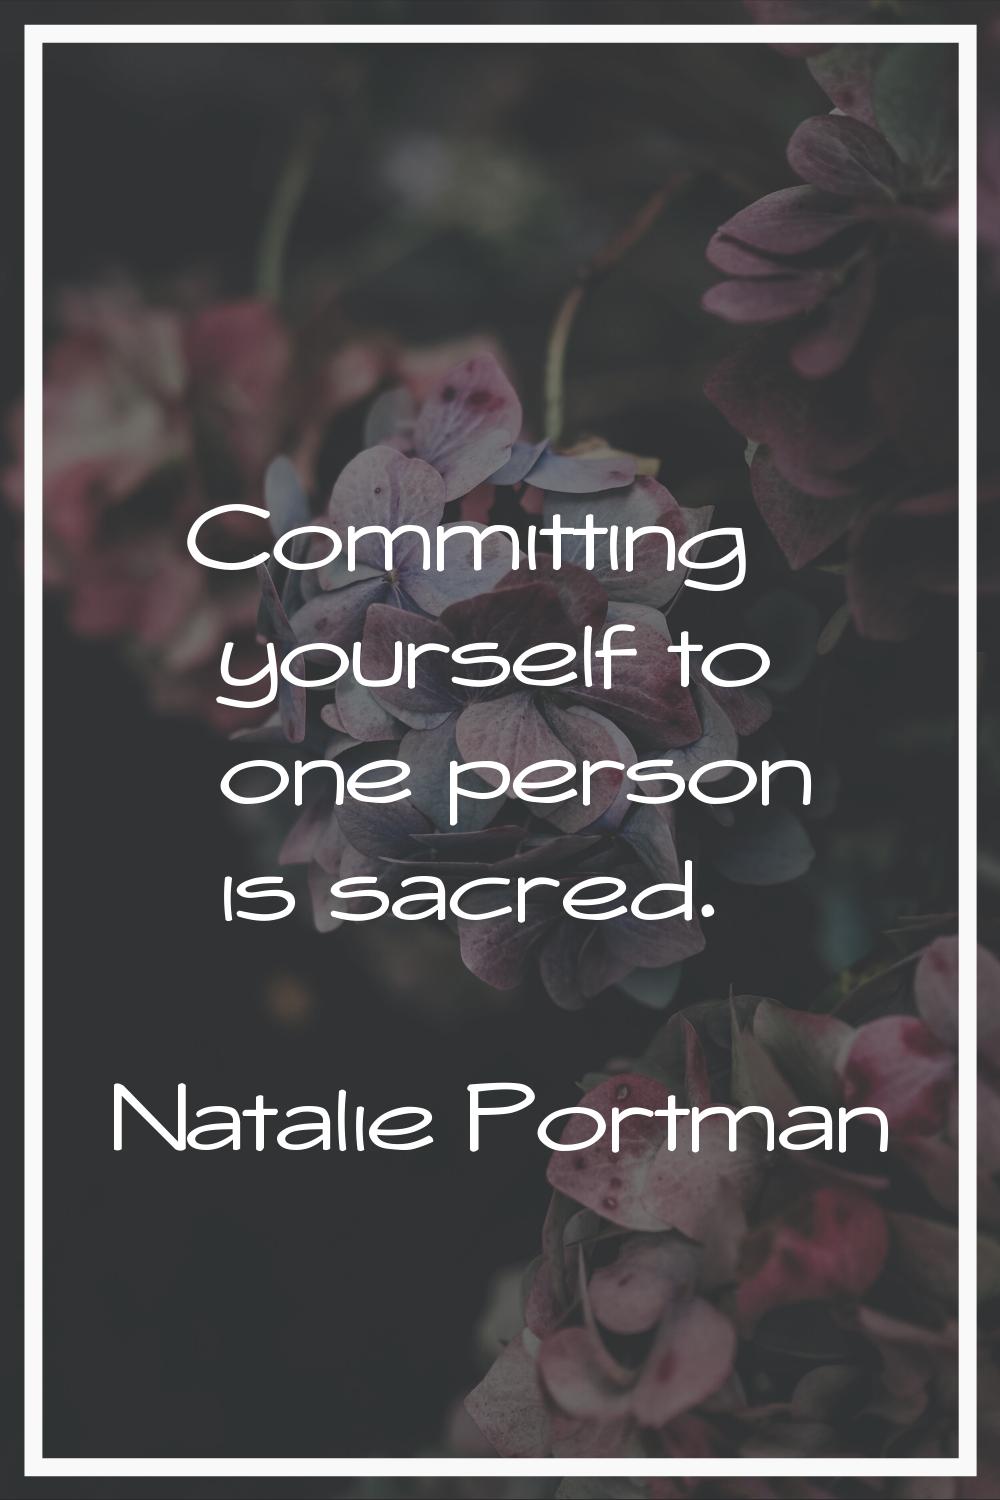 Committing yourself to one person is sacred.